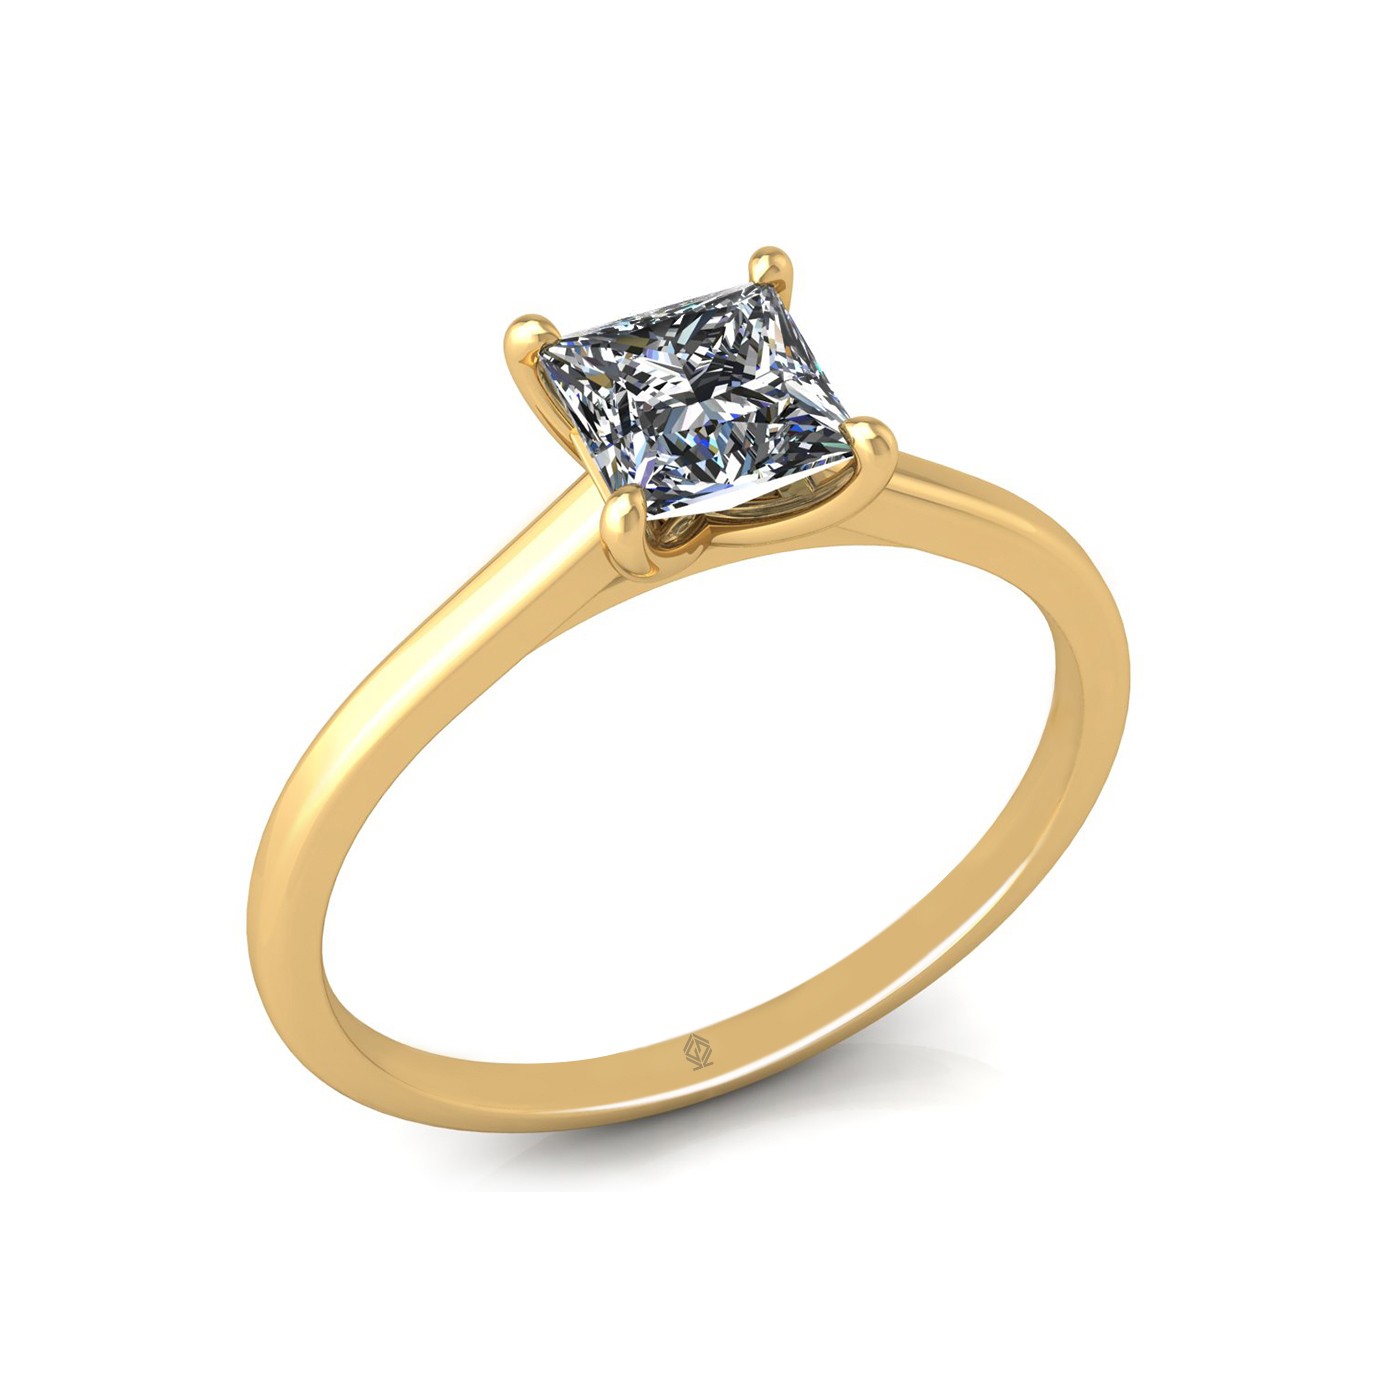 18k yellow gold  0,80 ct 4 prongs solitaire princess cut diamond engagement ring with whisper thin band